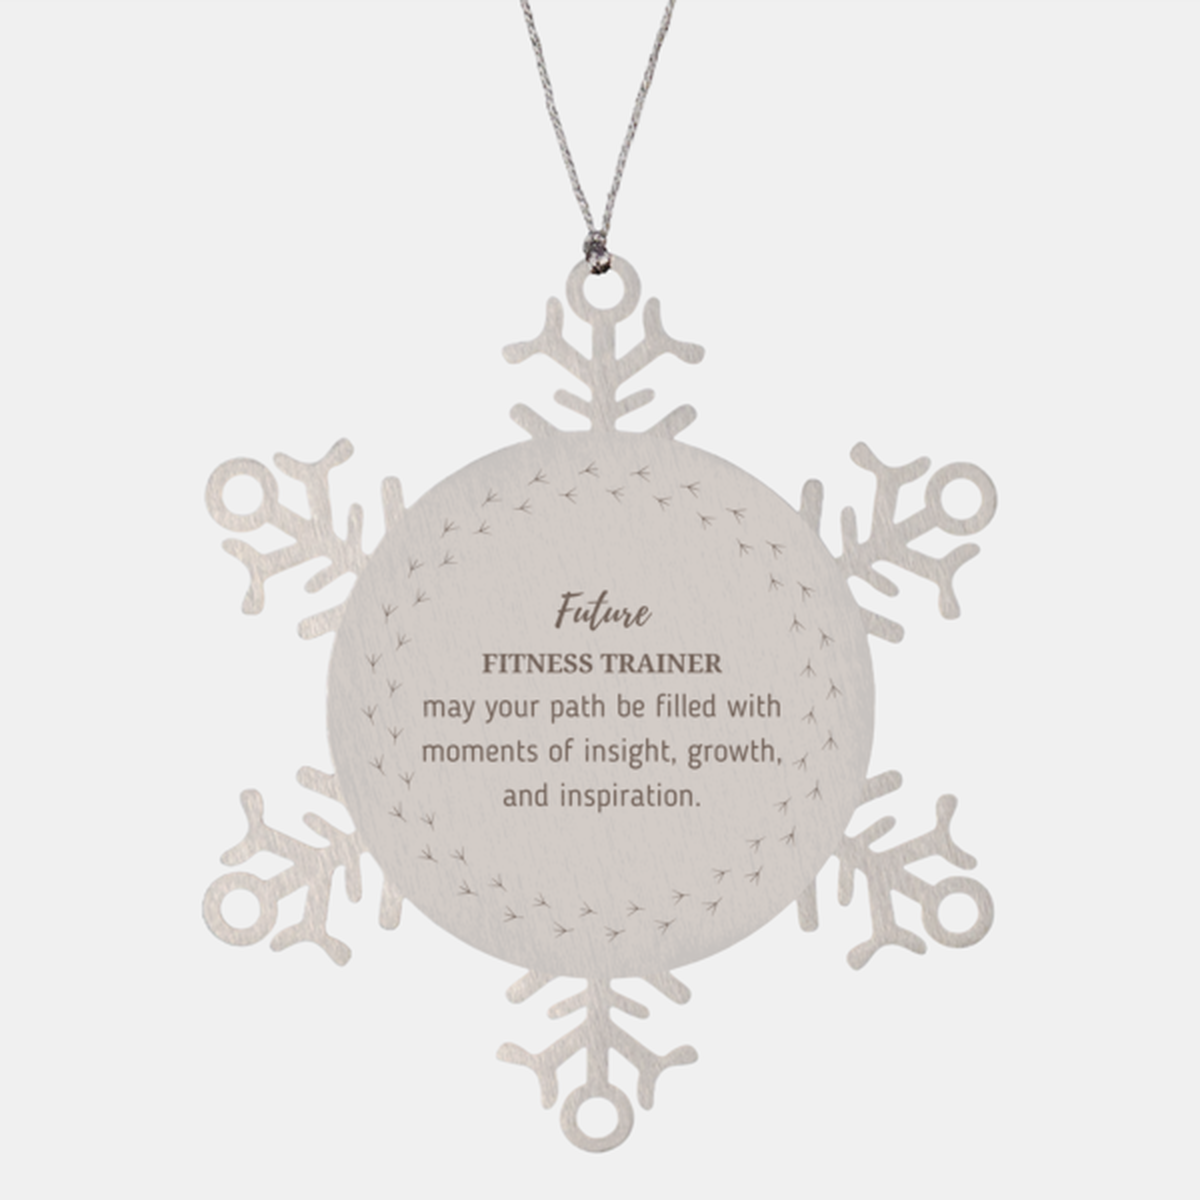 Future Fitness Trainer Gifts, May your path be filled with moments of insight, Graduation Gifts for New Fitness Trainer, Christmas Unique Snowflake Ornament For Men, Women, Friends